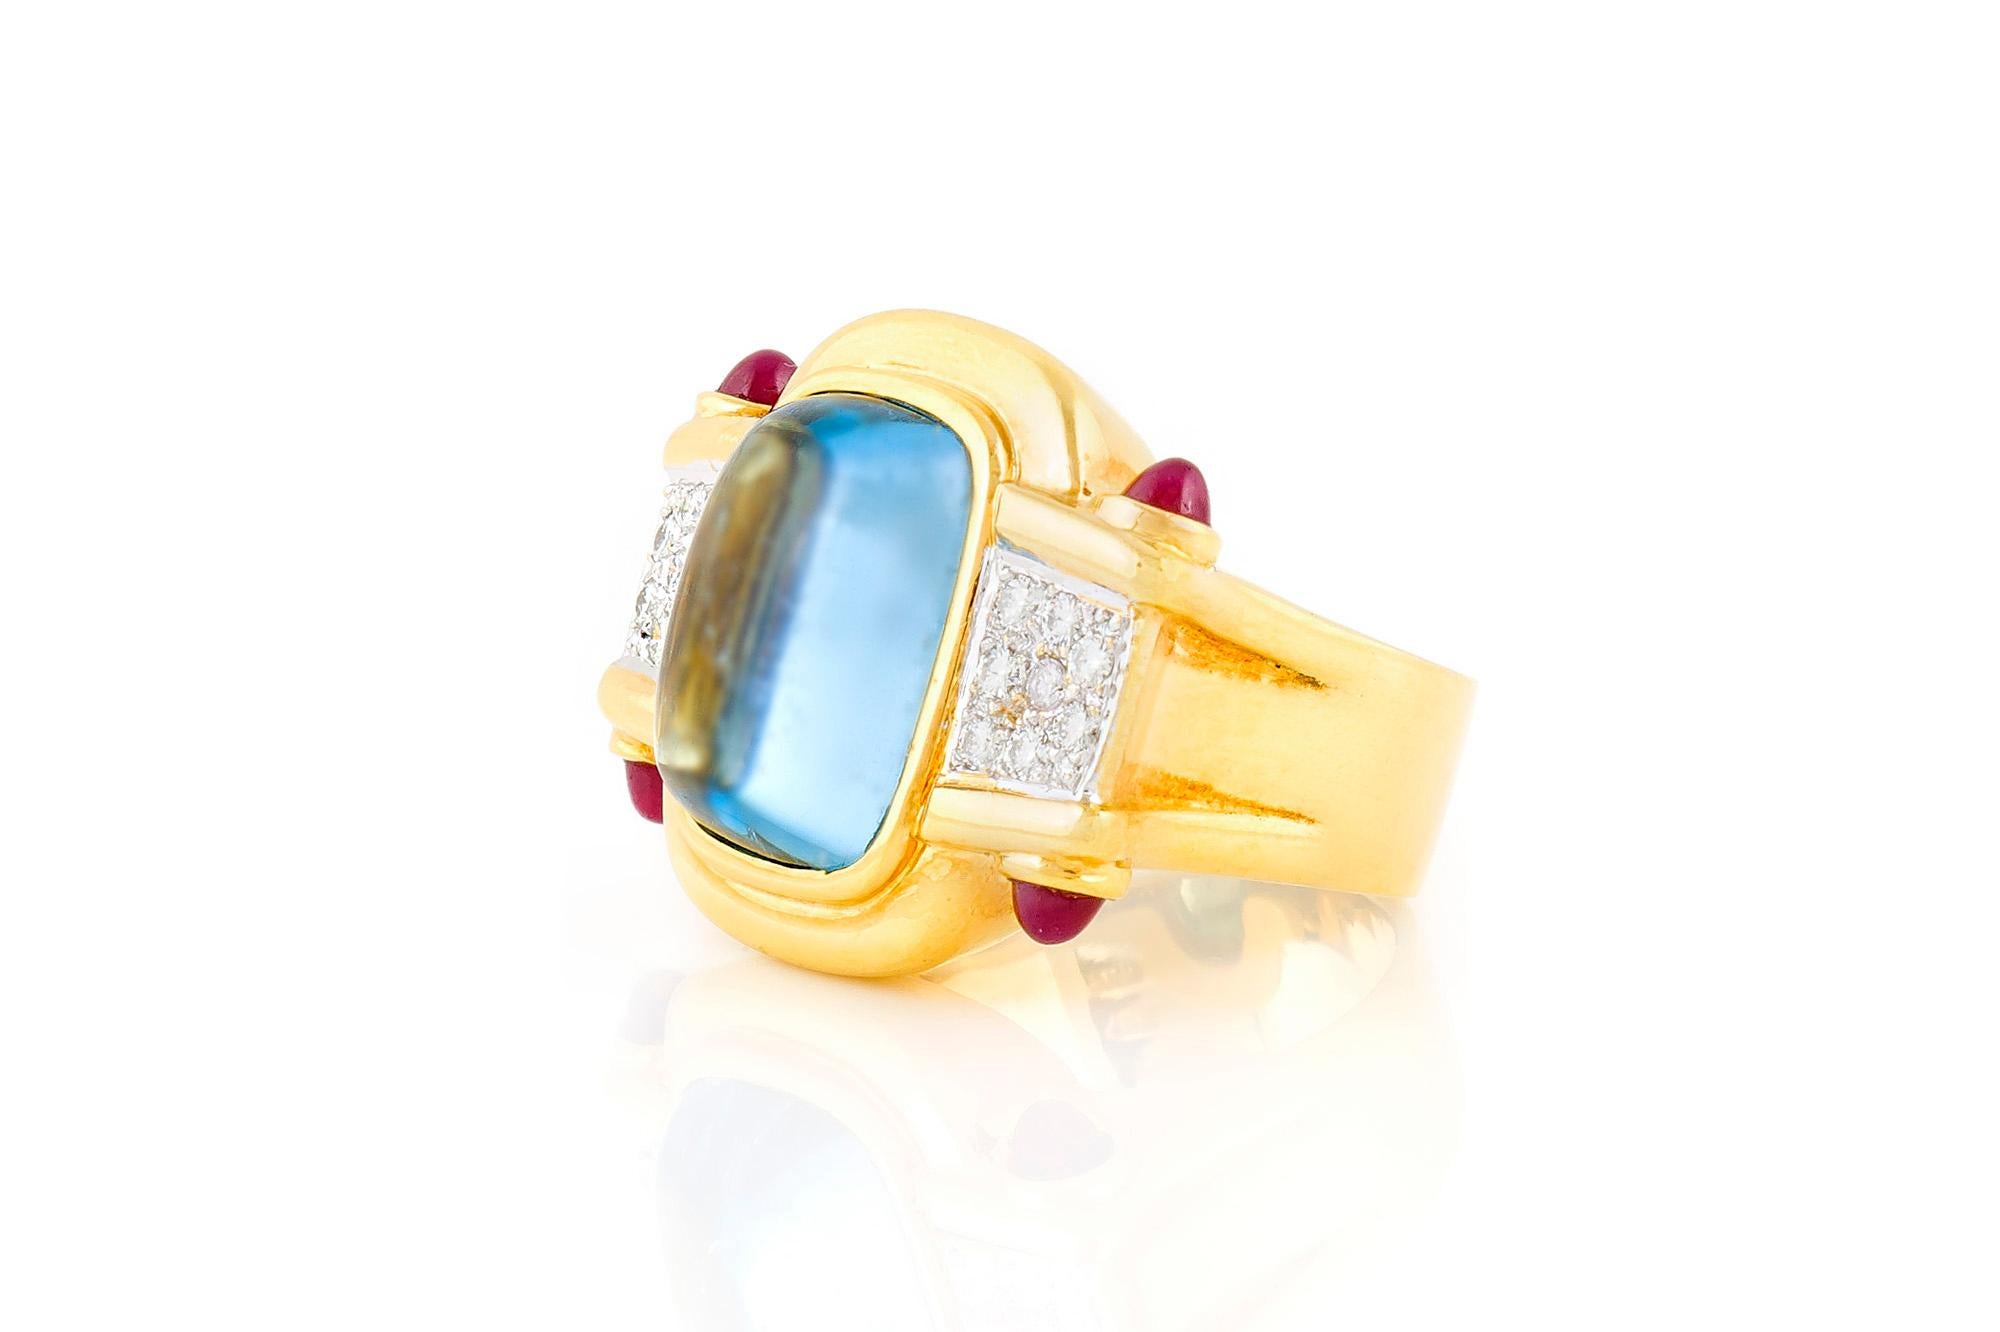 Ring, finely crafted in 18k yellow gold with an aquamarine center stone weighting approximately a total of 8.00 carats, diamonds on sides weighting a total of 0.40 carats and rubies weighting a total of 0.50 carats. Circa 1990's.